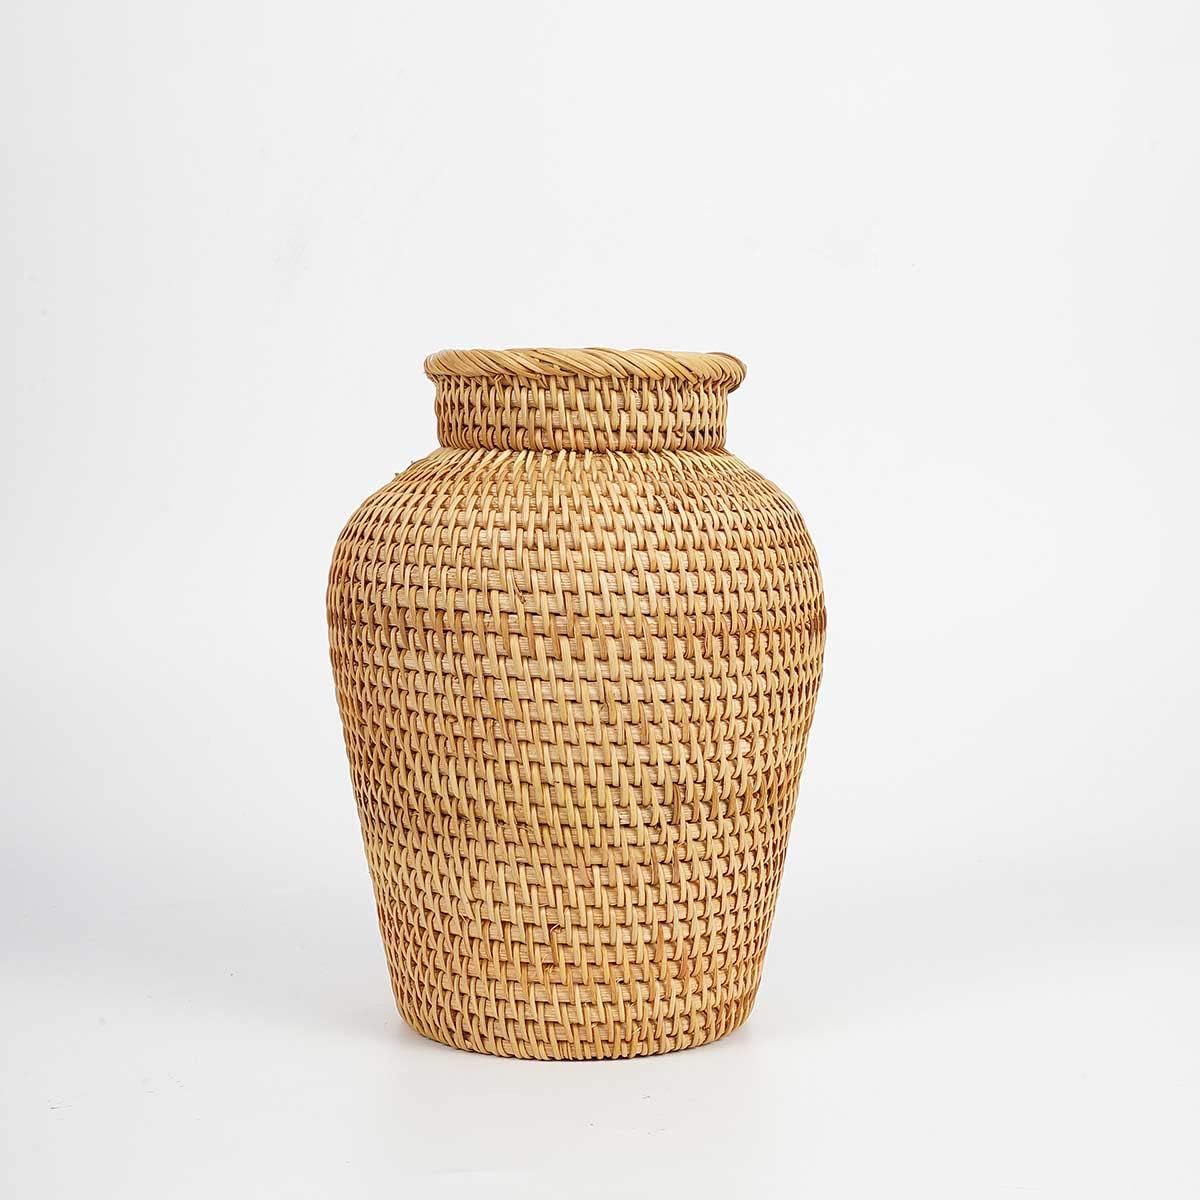 Rattan Vase Country Rustic Style Handmade Woven Plant Flower Vase Basket for Home Decor | Amazon (US)